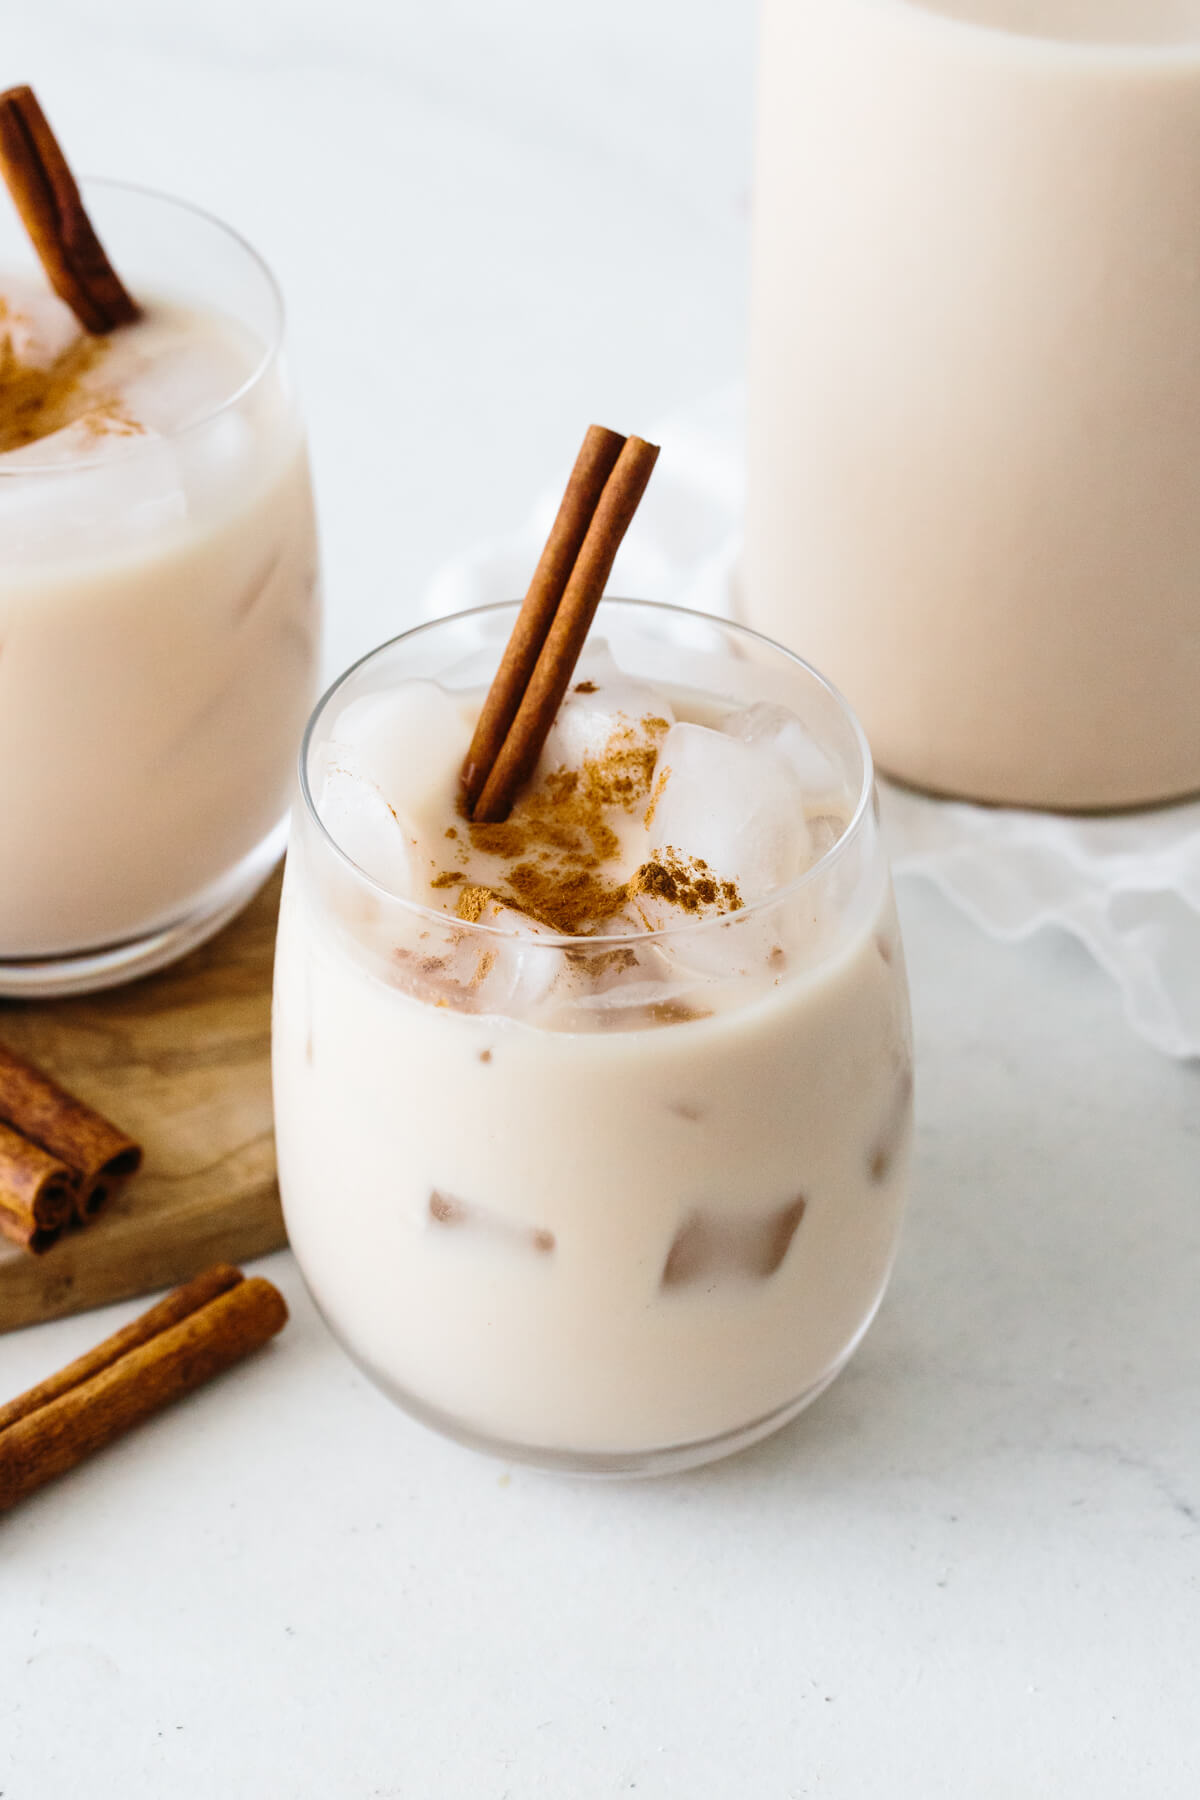 Horchata in a glass with cinnamon stick.